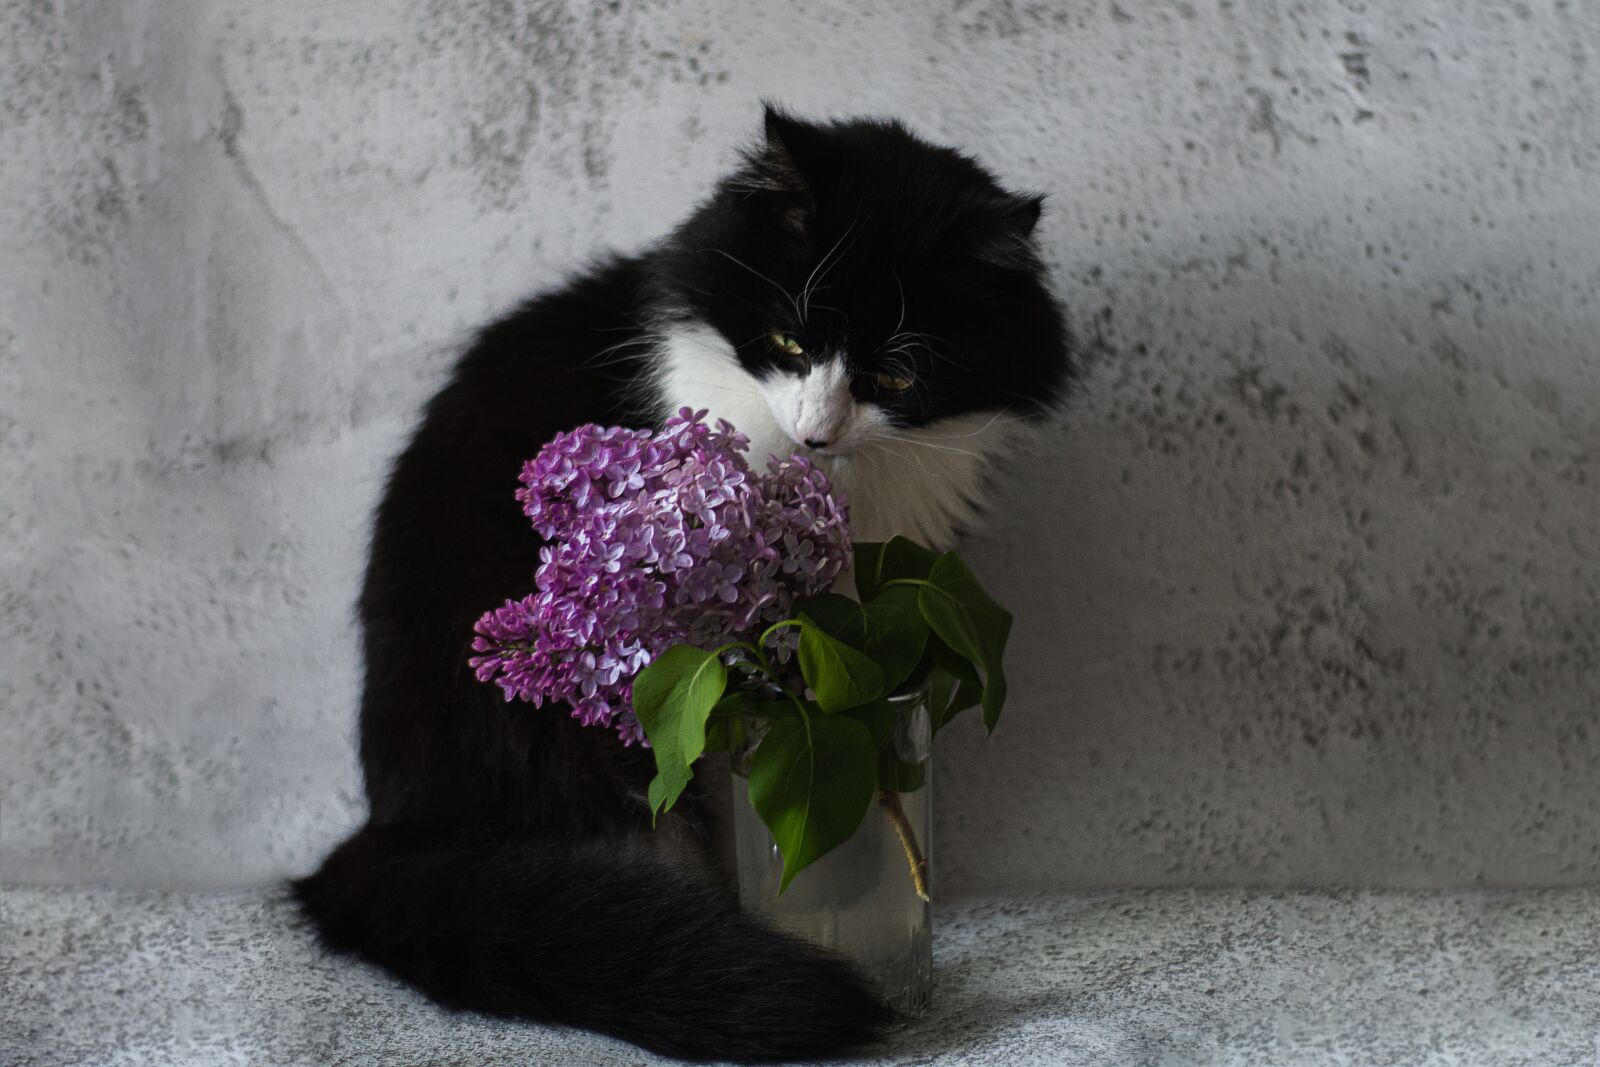 Sony a6400 sample photo. Cat, flowers, lilac photography